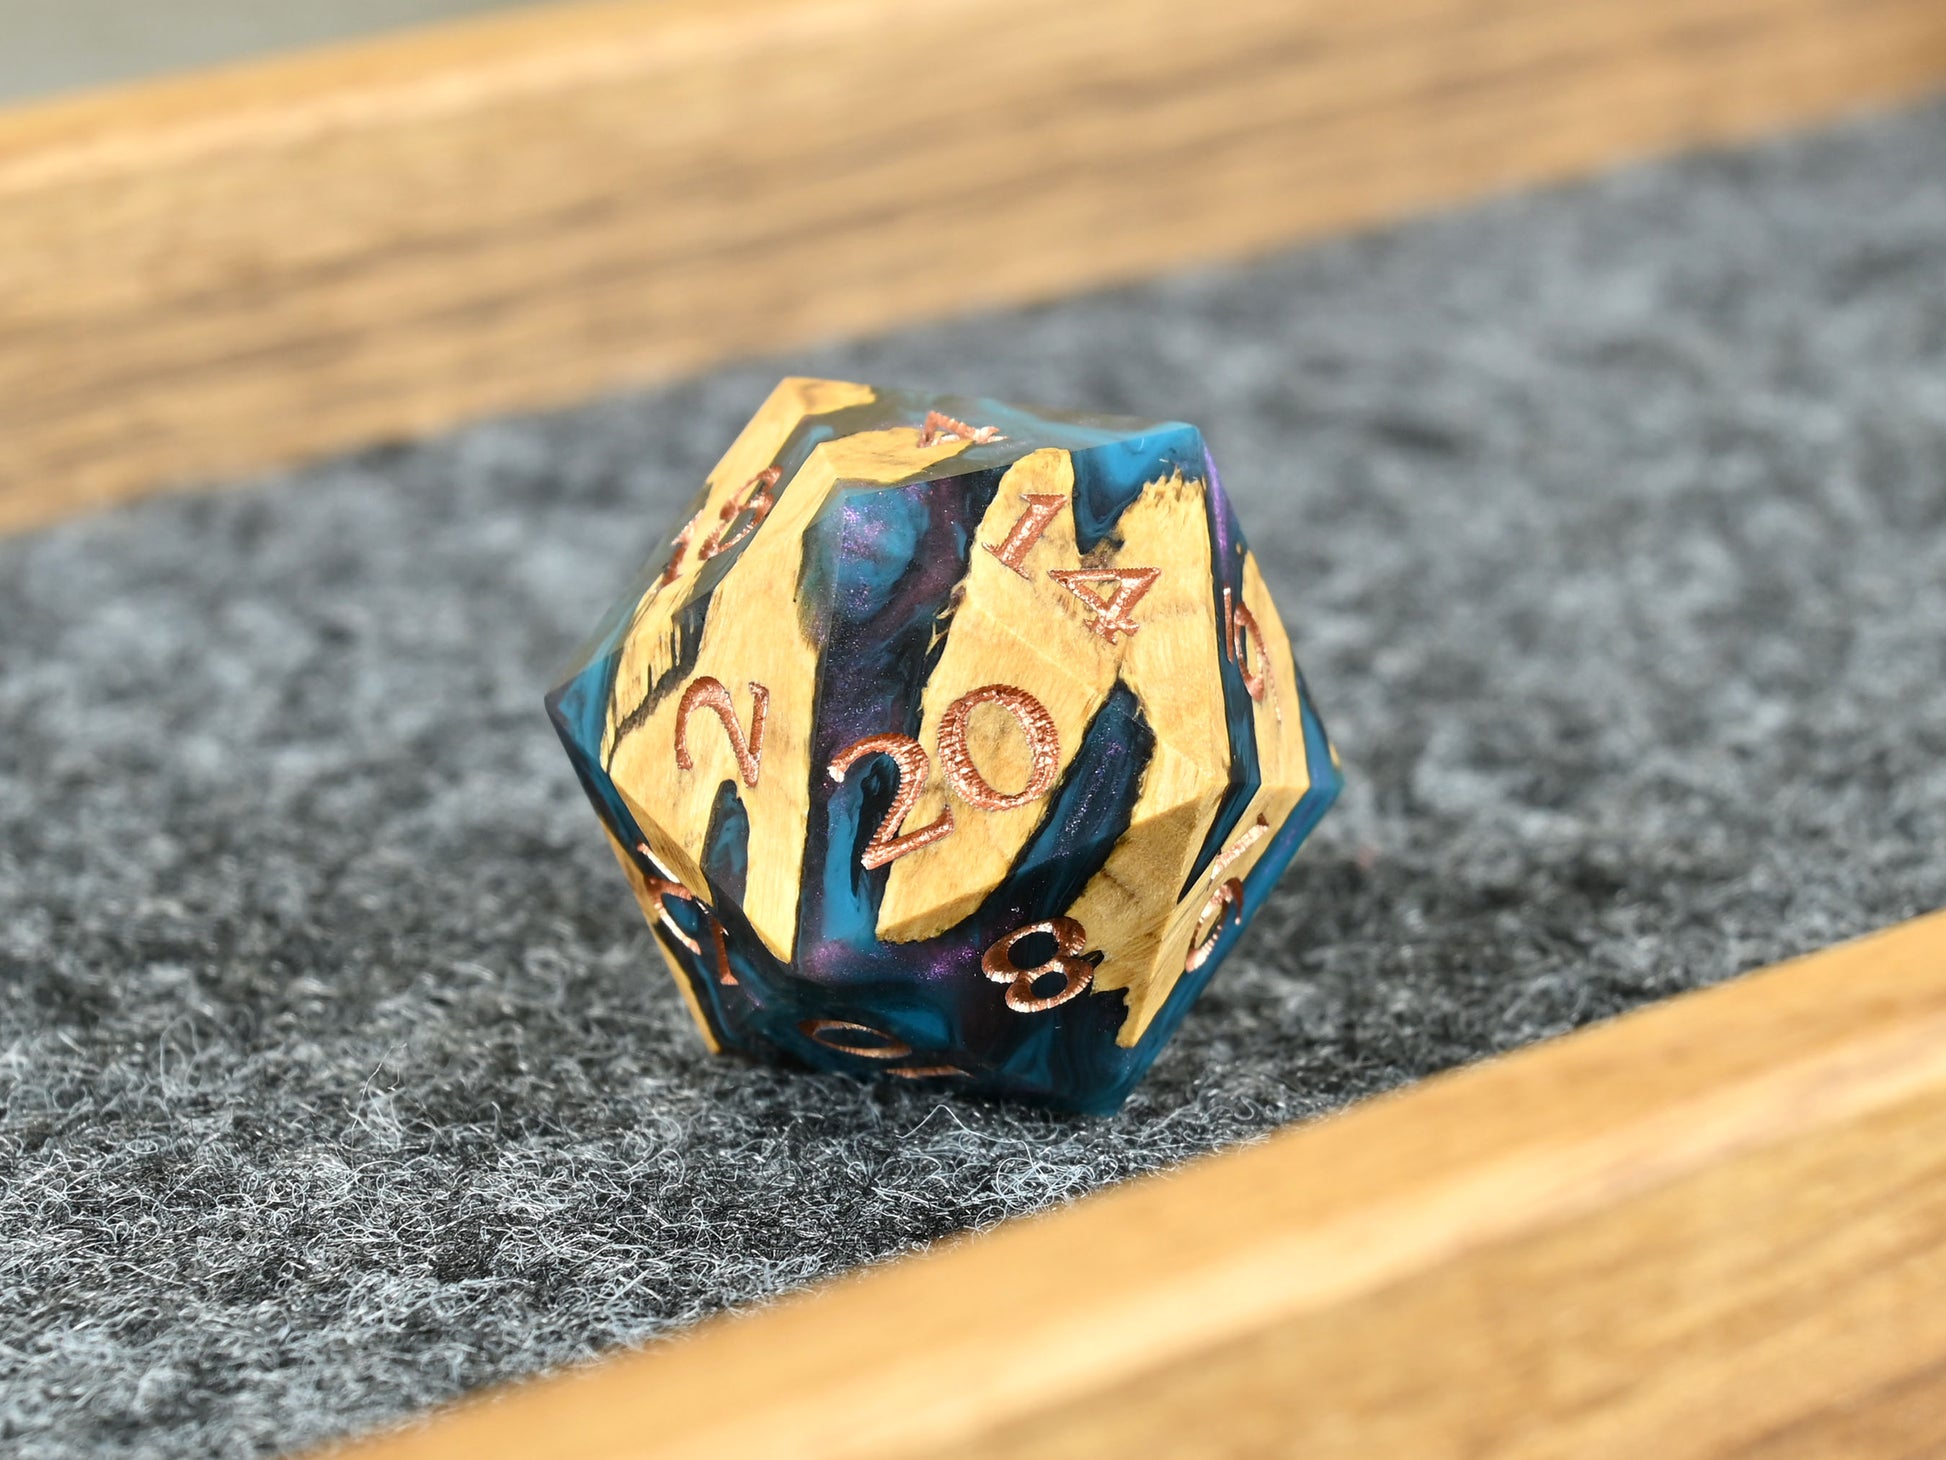 D20 dice made from cholla wood and resin for D&D ttrpg